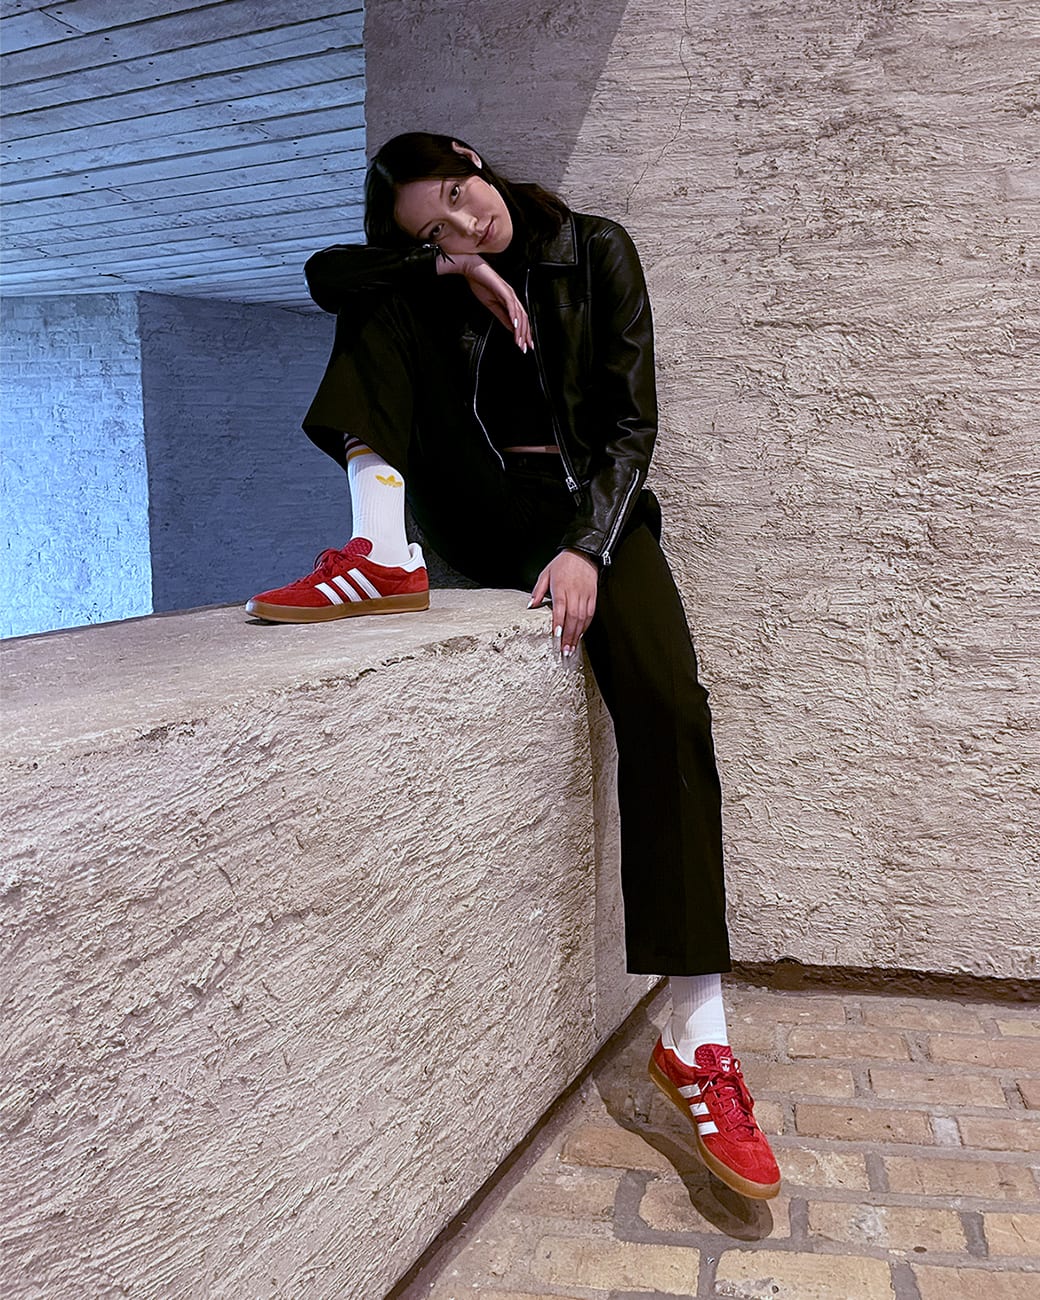 A female model sitting on a concrete block whilst wearing an all black outfit, white socks and red adidas Gazelle sneakers with white stripes.